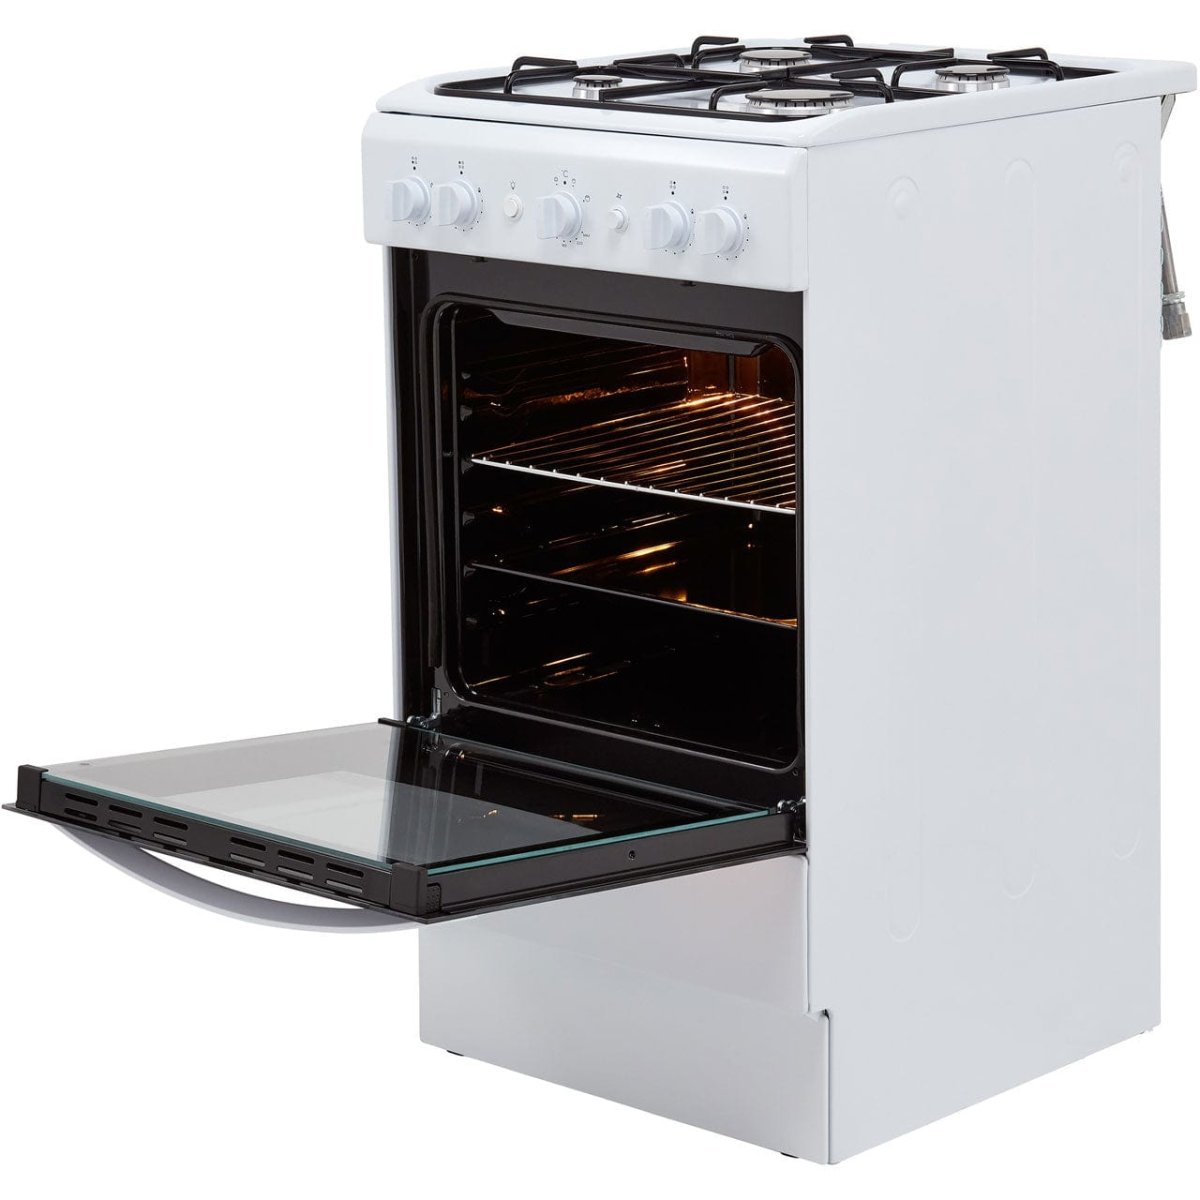 Indesit Cloe IS5G1KMW 50cm Gas Cooker - White - A Rated - Atlantic Electrics